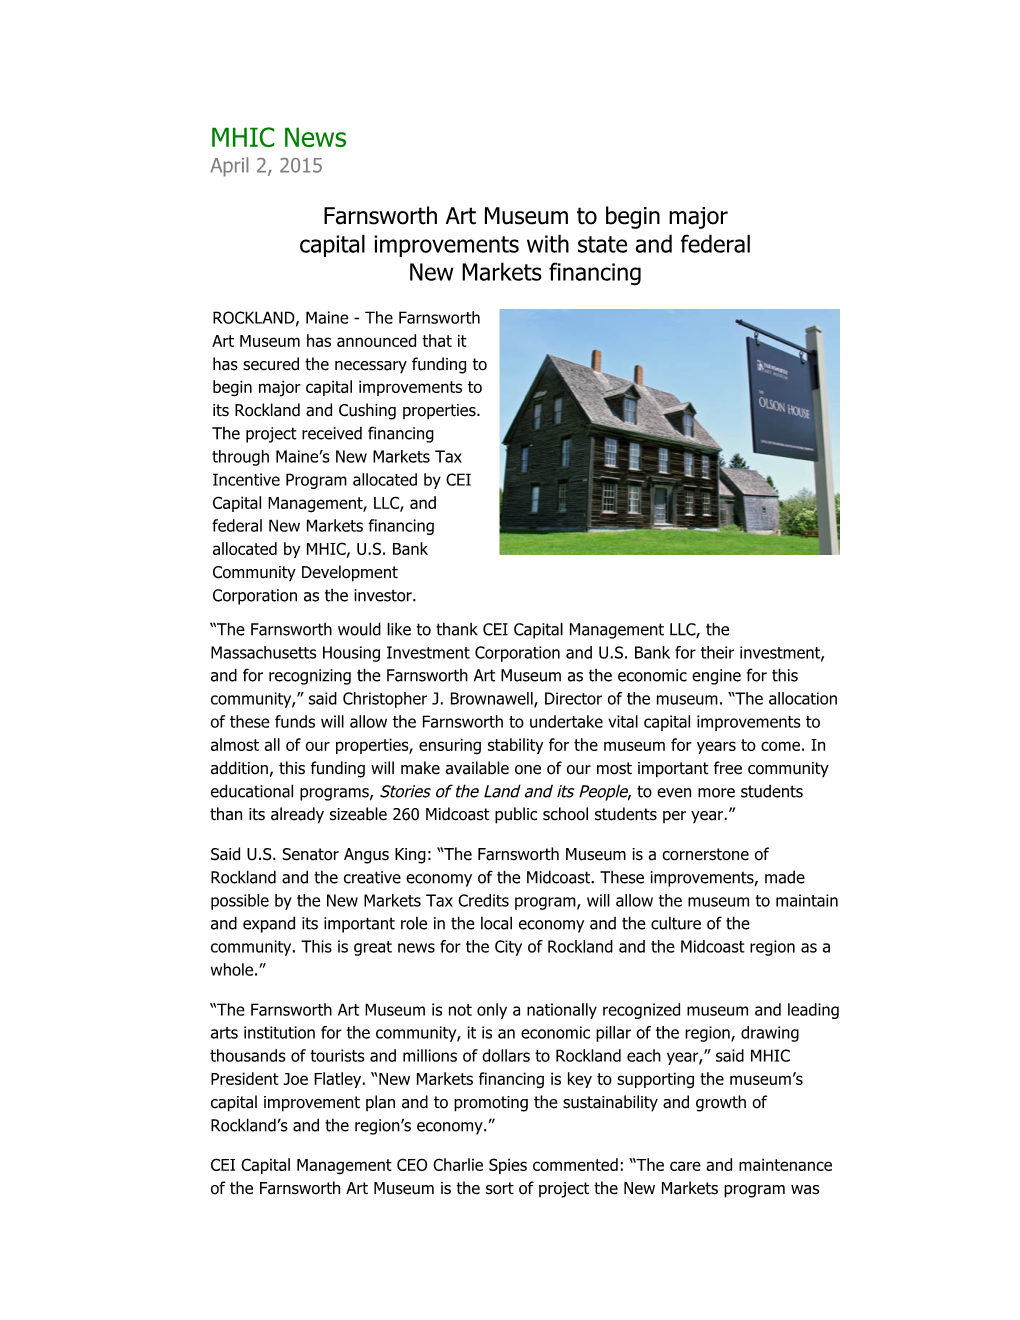 Maine's Farnsworth Museum Gets New Markets Financing for Major